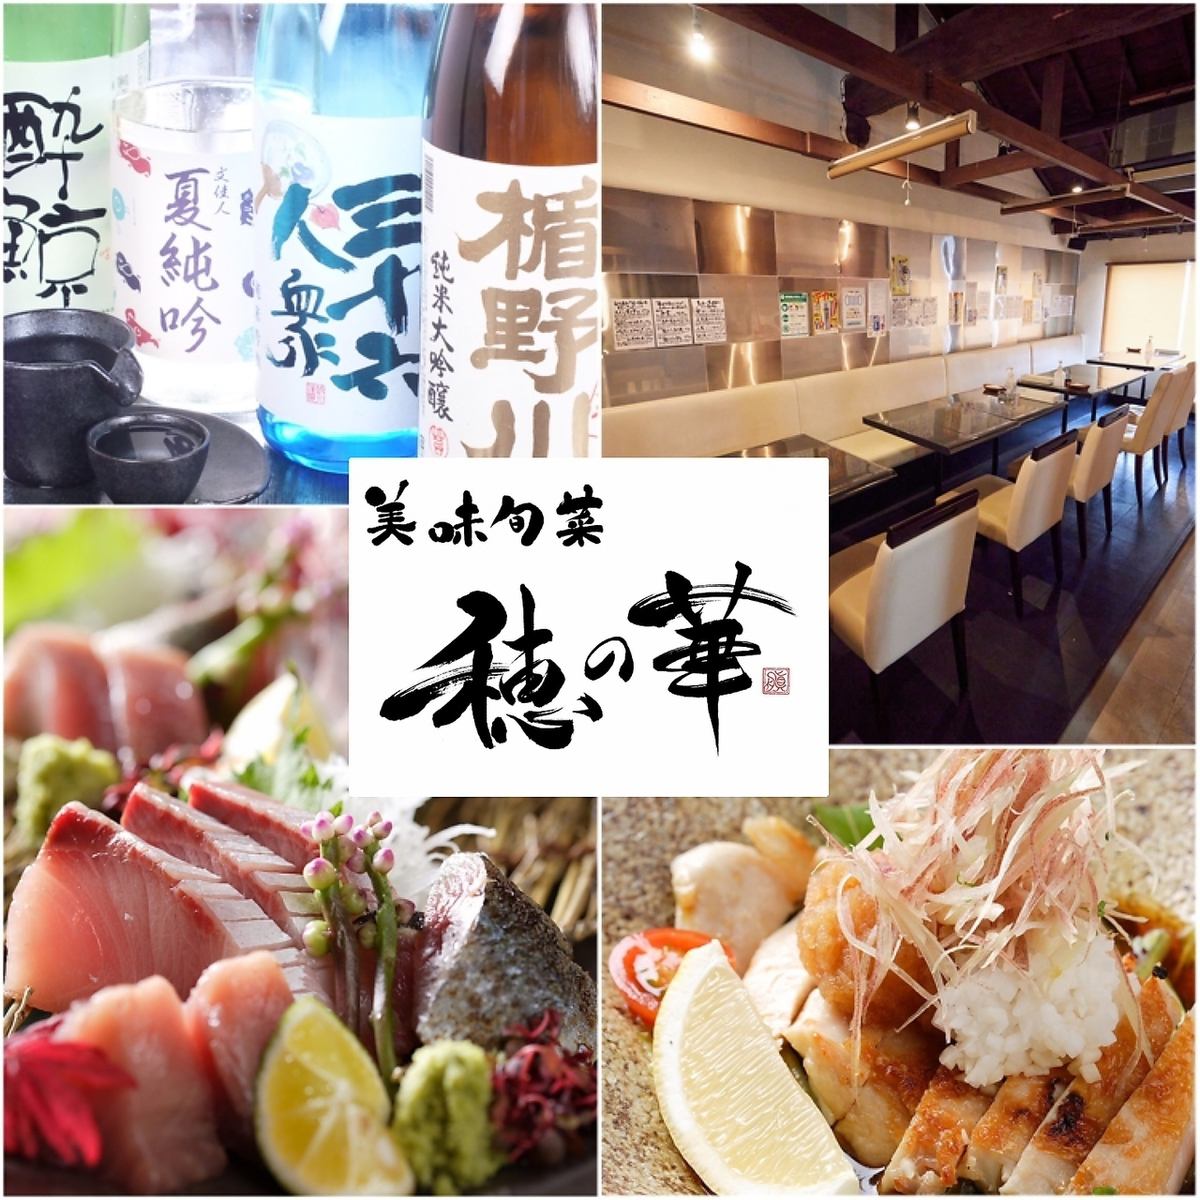 ≪Course meal 4,400 yen~≫We provide hospitality to our customers, from ingredients to cooking methods, from the space to customer service.